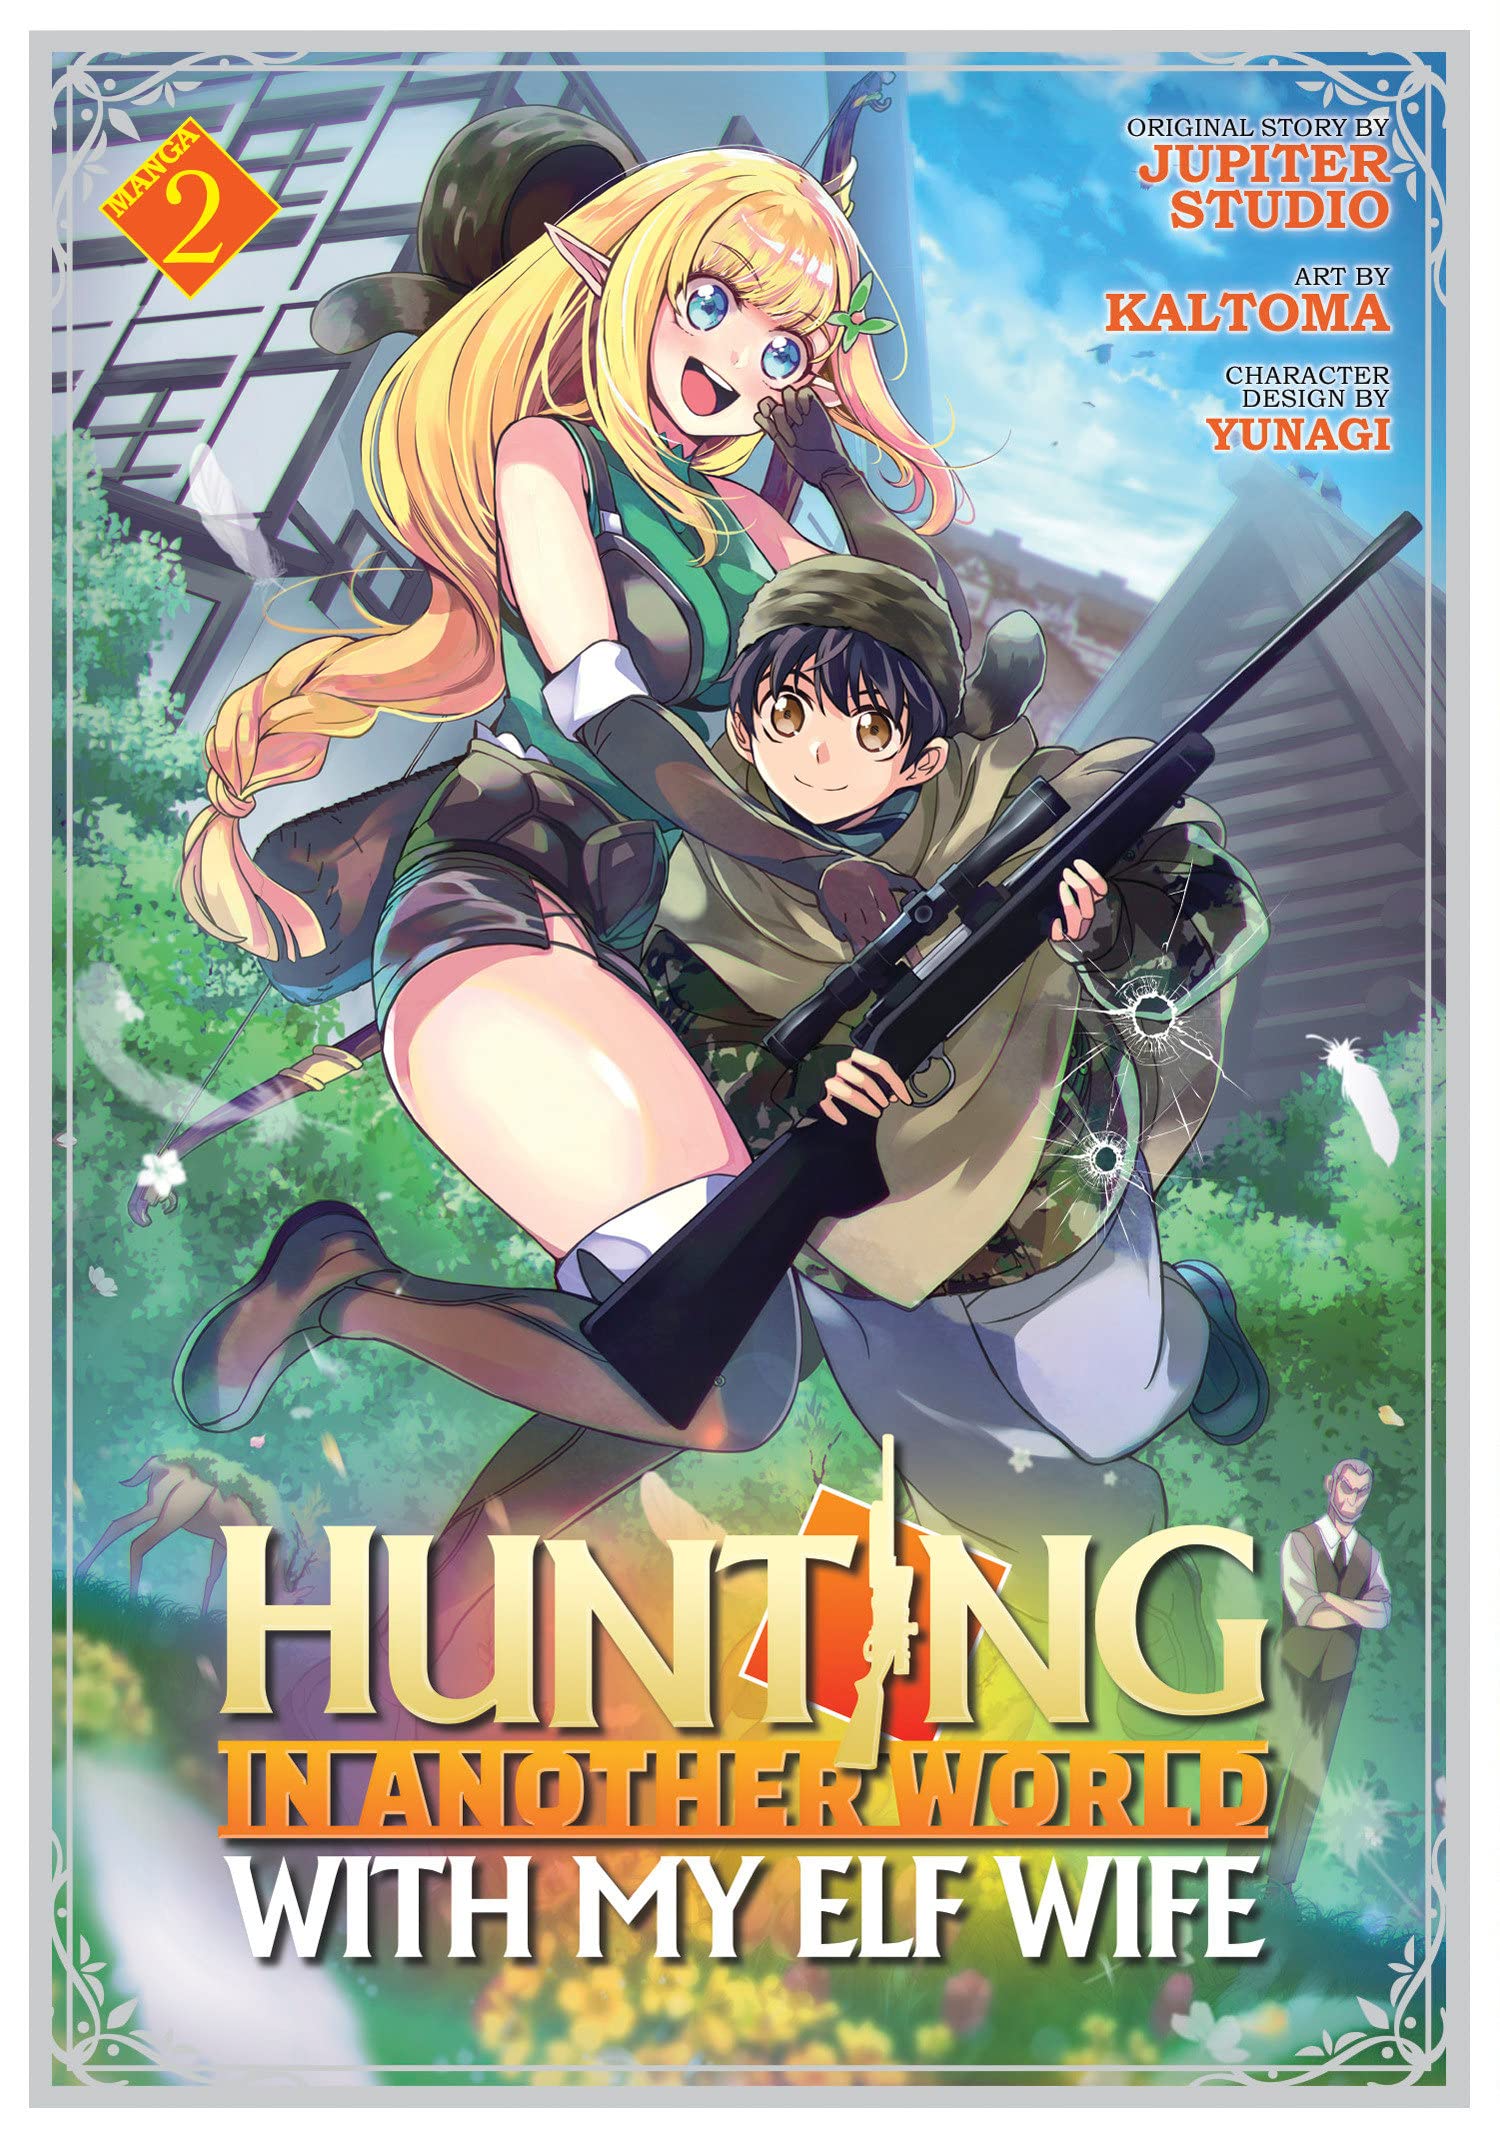 Hunting in Another World with My Elf Wife (Manga) Vol. 02